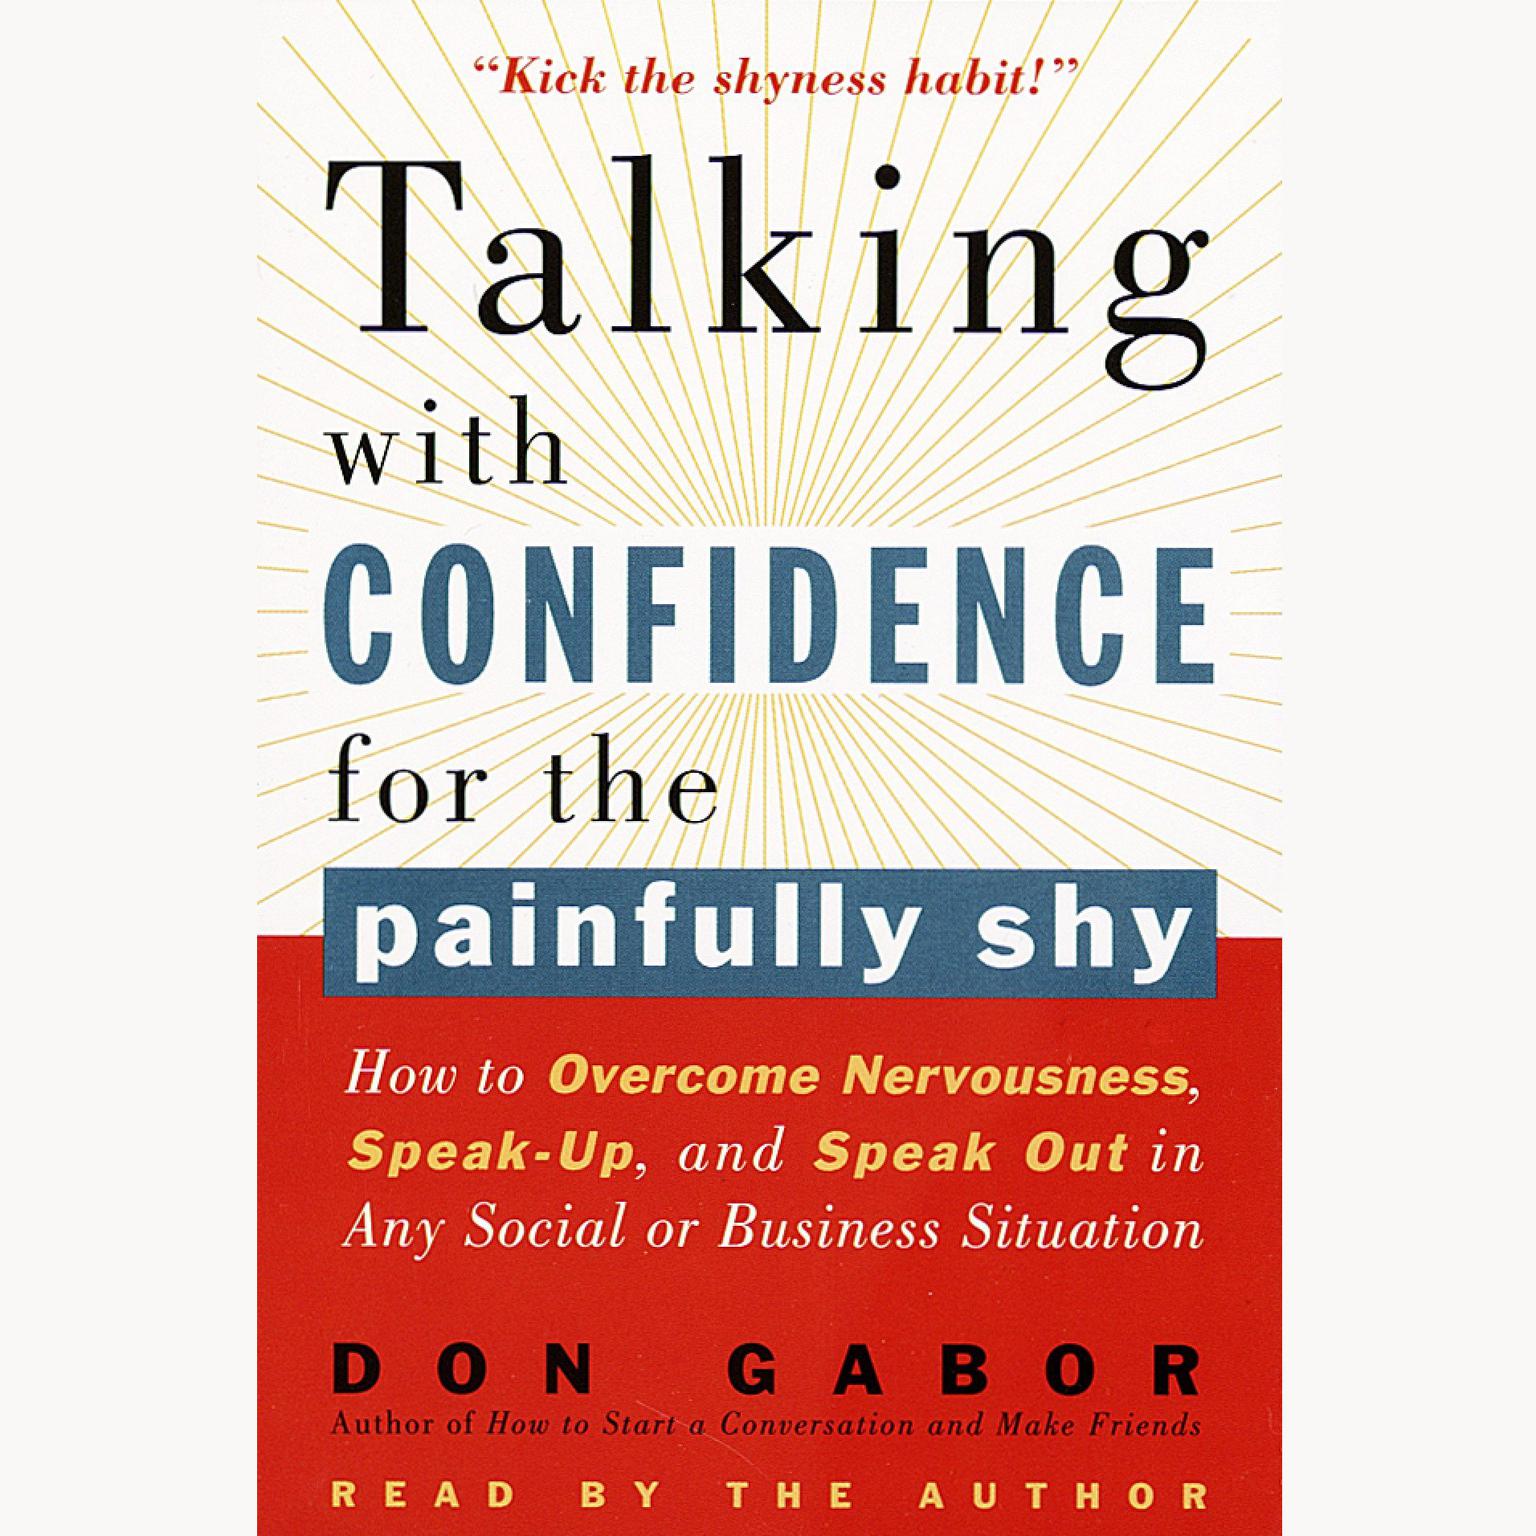 Talking with Confidence for the Painfully Shy (Abridged): How to Overcome Nervousness, Speak-Up, and Speak Out in Any Social or Business Situation Audiobook, by Don Gabor